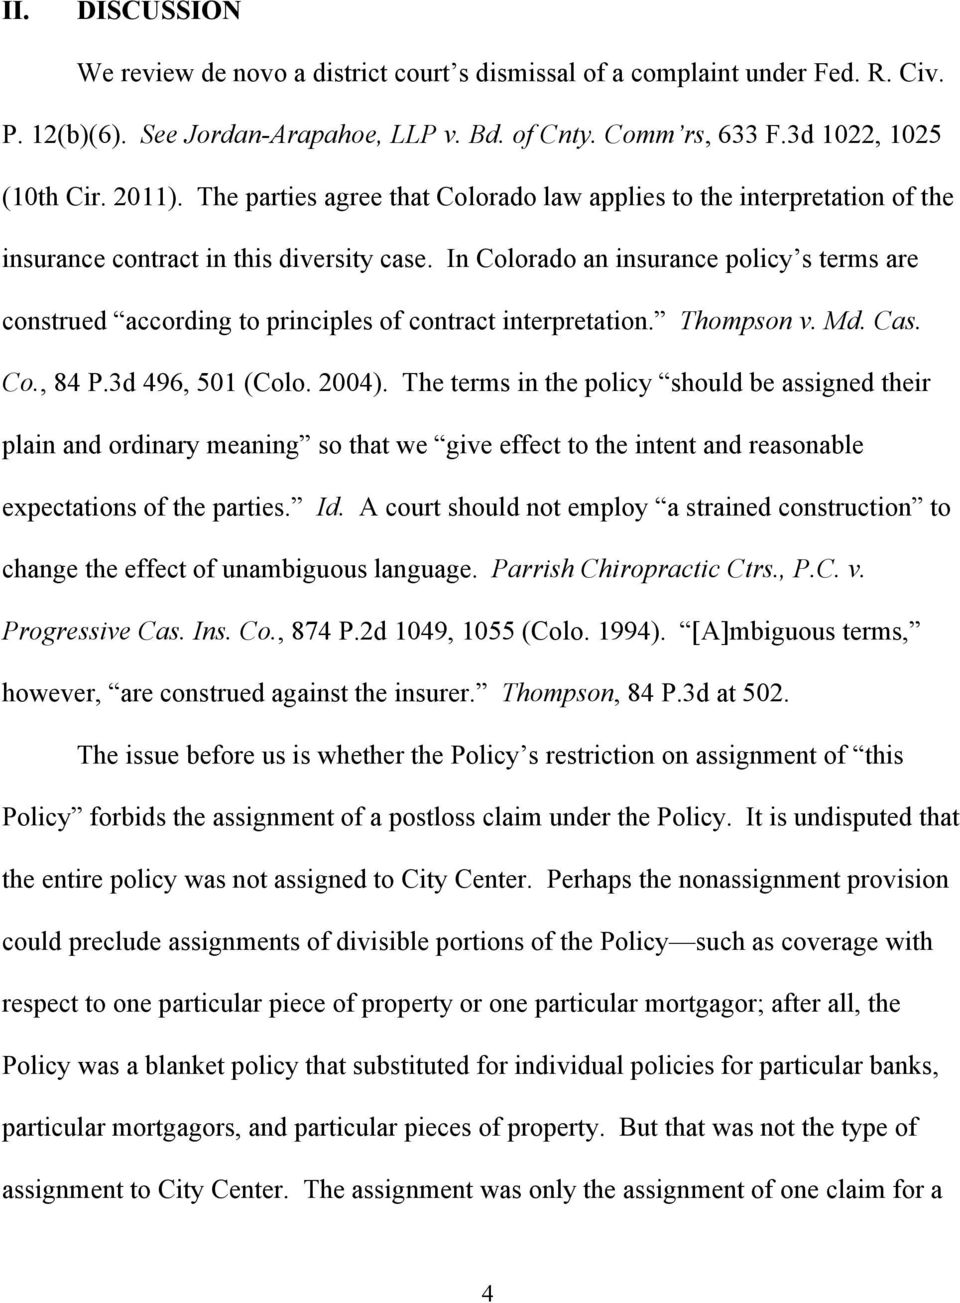 In Colorado an insurance policy s terms are construed according to principles of contract interpretation. Thompson v. Md. Cas. Co., 84 P.3d 496, 501 (Colo. 2004).